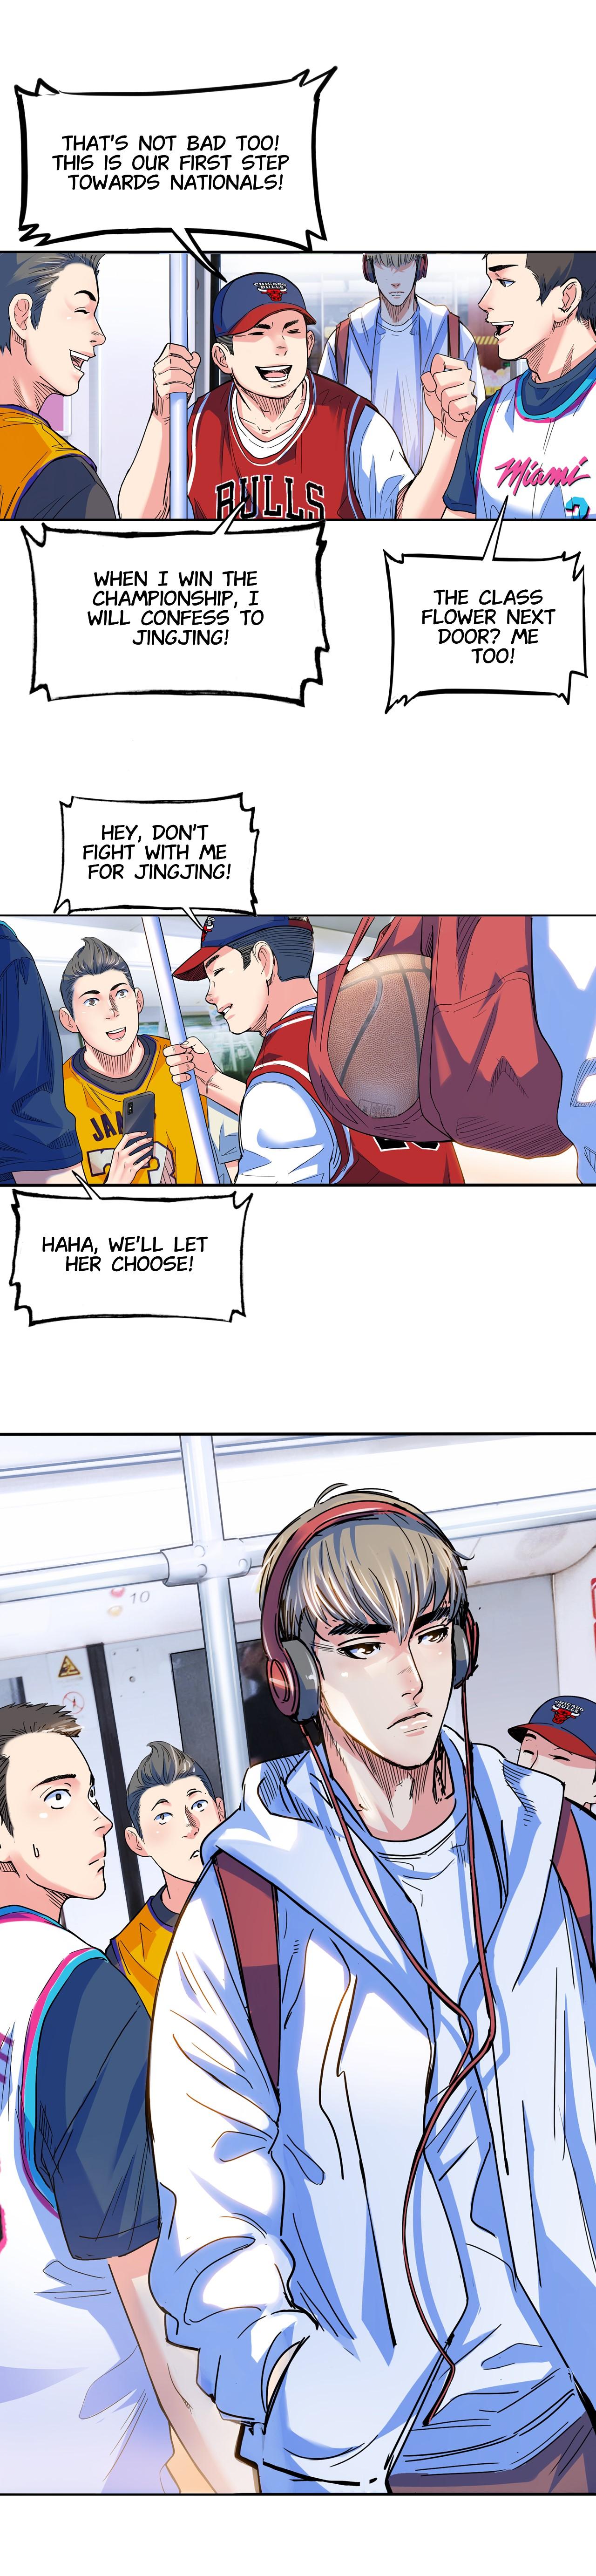 Streetball In The Hood - Page 3